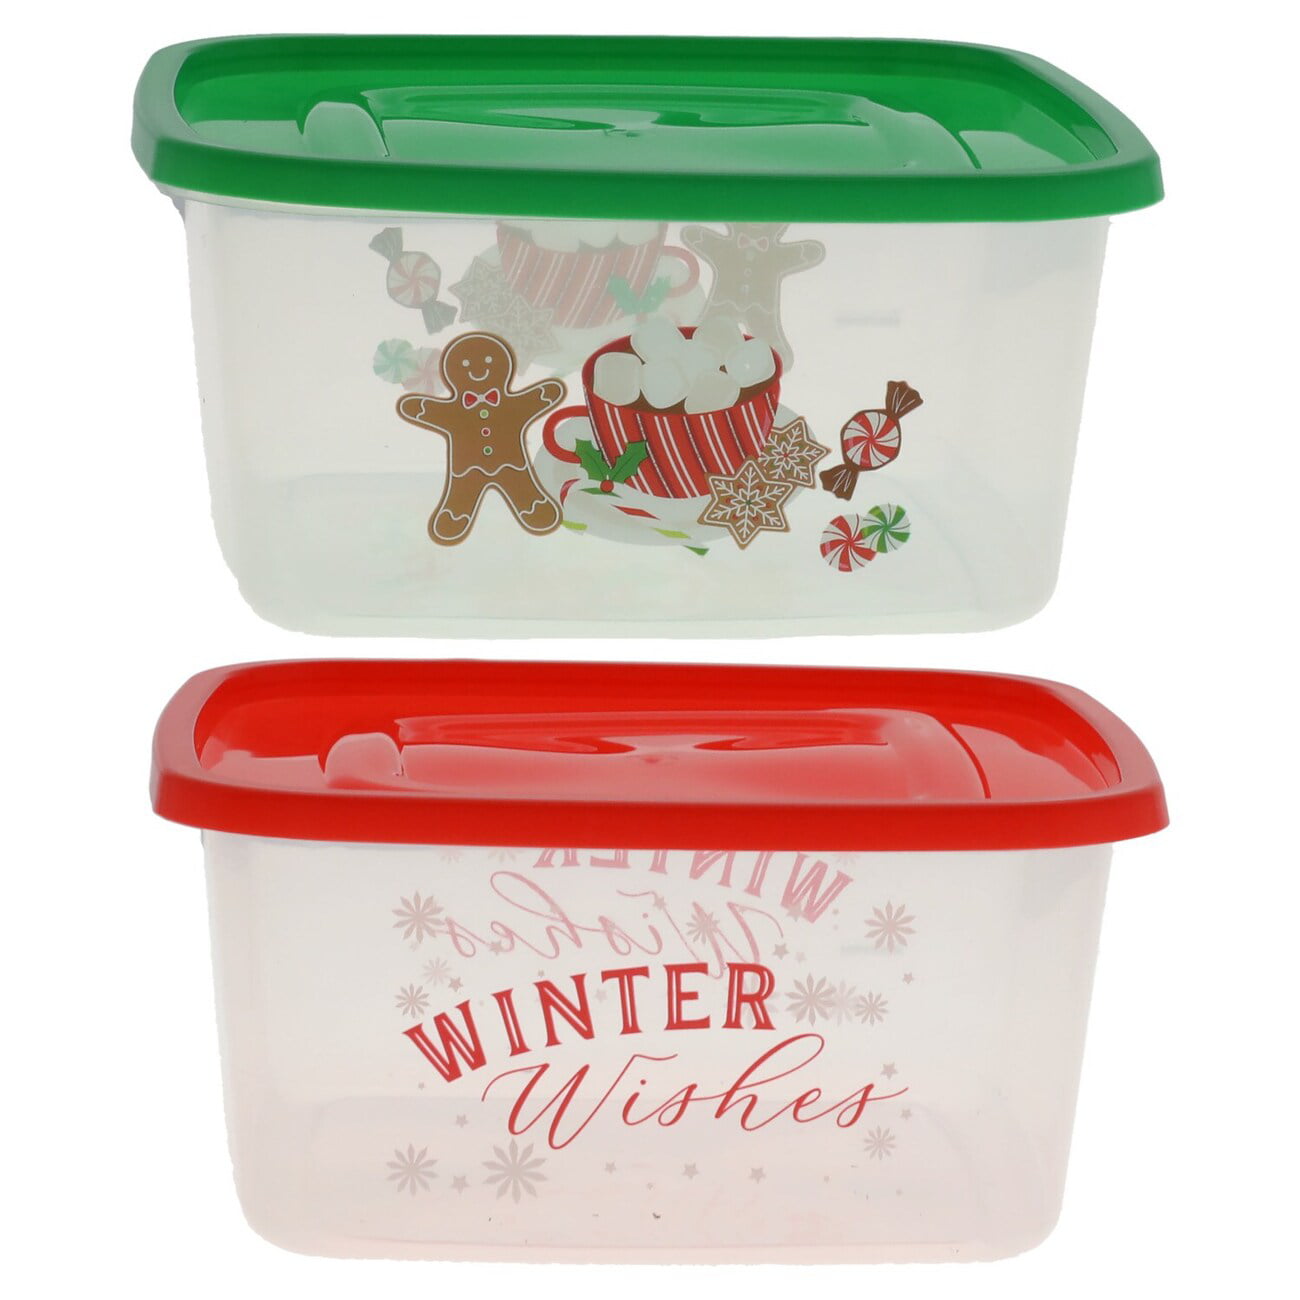 Food Storage Containers & Methods for Christmas Leftovers